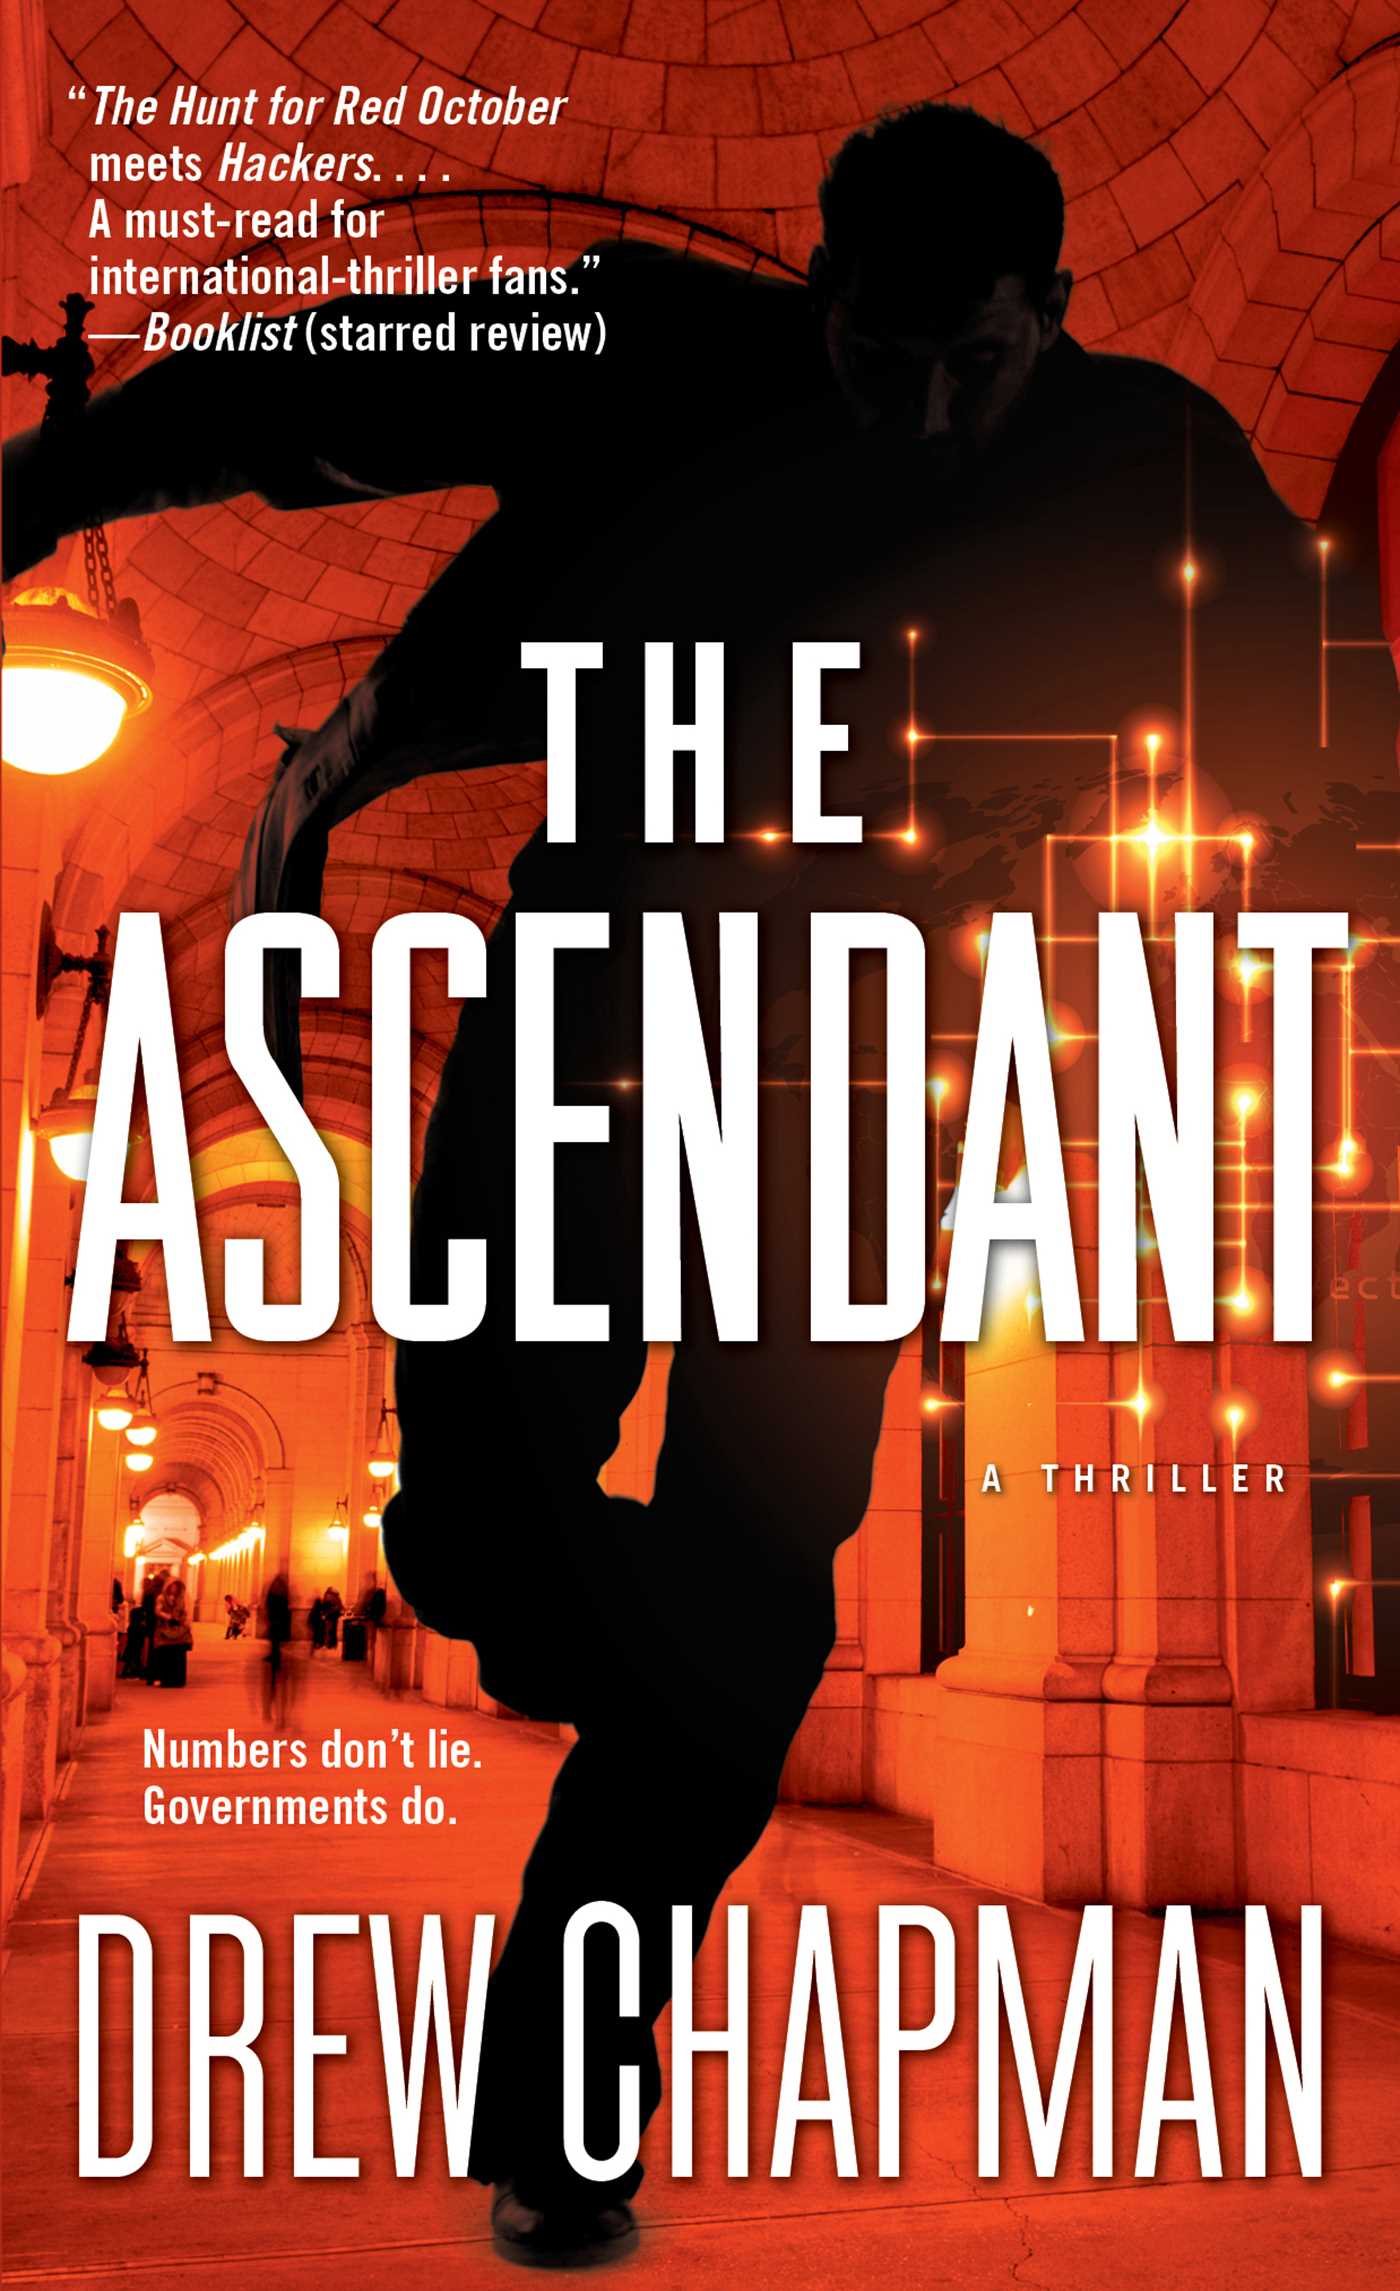 Image for "The Ascendant"